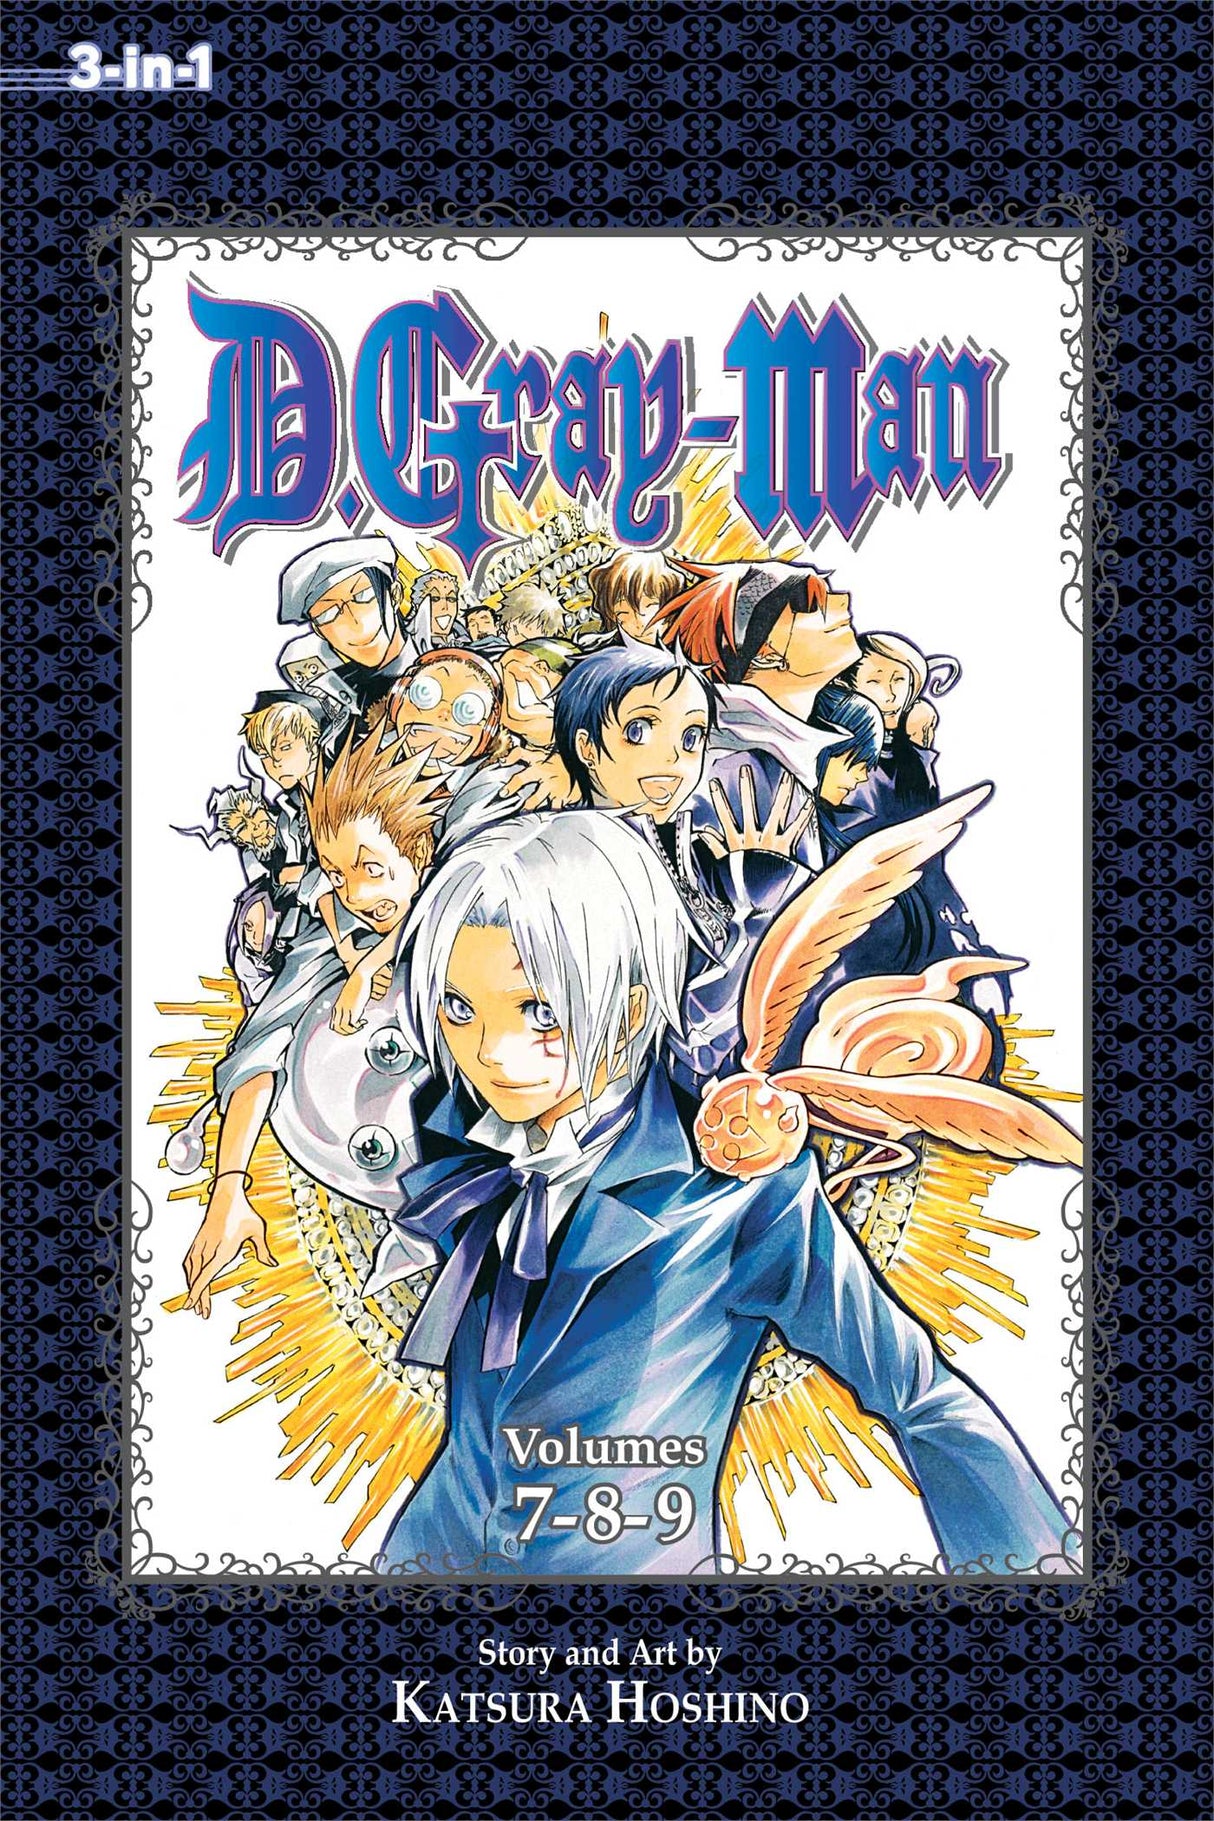 Cover image of the Manga DGray-man-3-in-1-Edition-Vol-3-Includes-vols-7-8-&-9